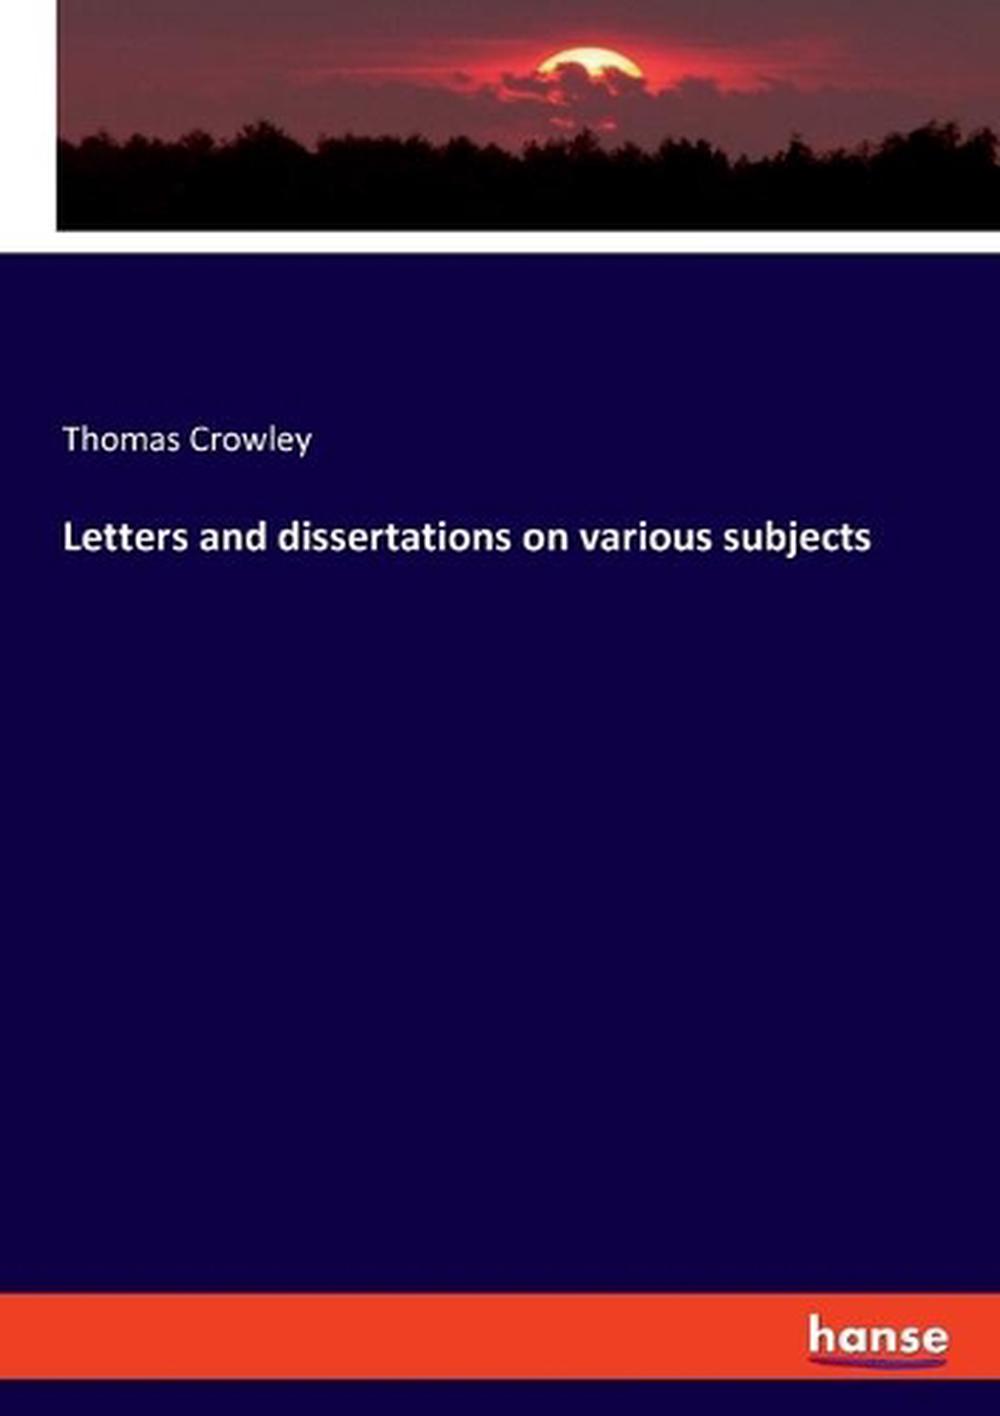 Dissertation and deering thomas e